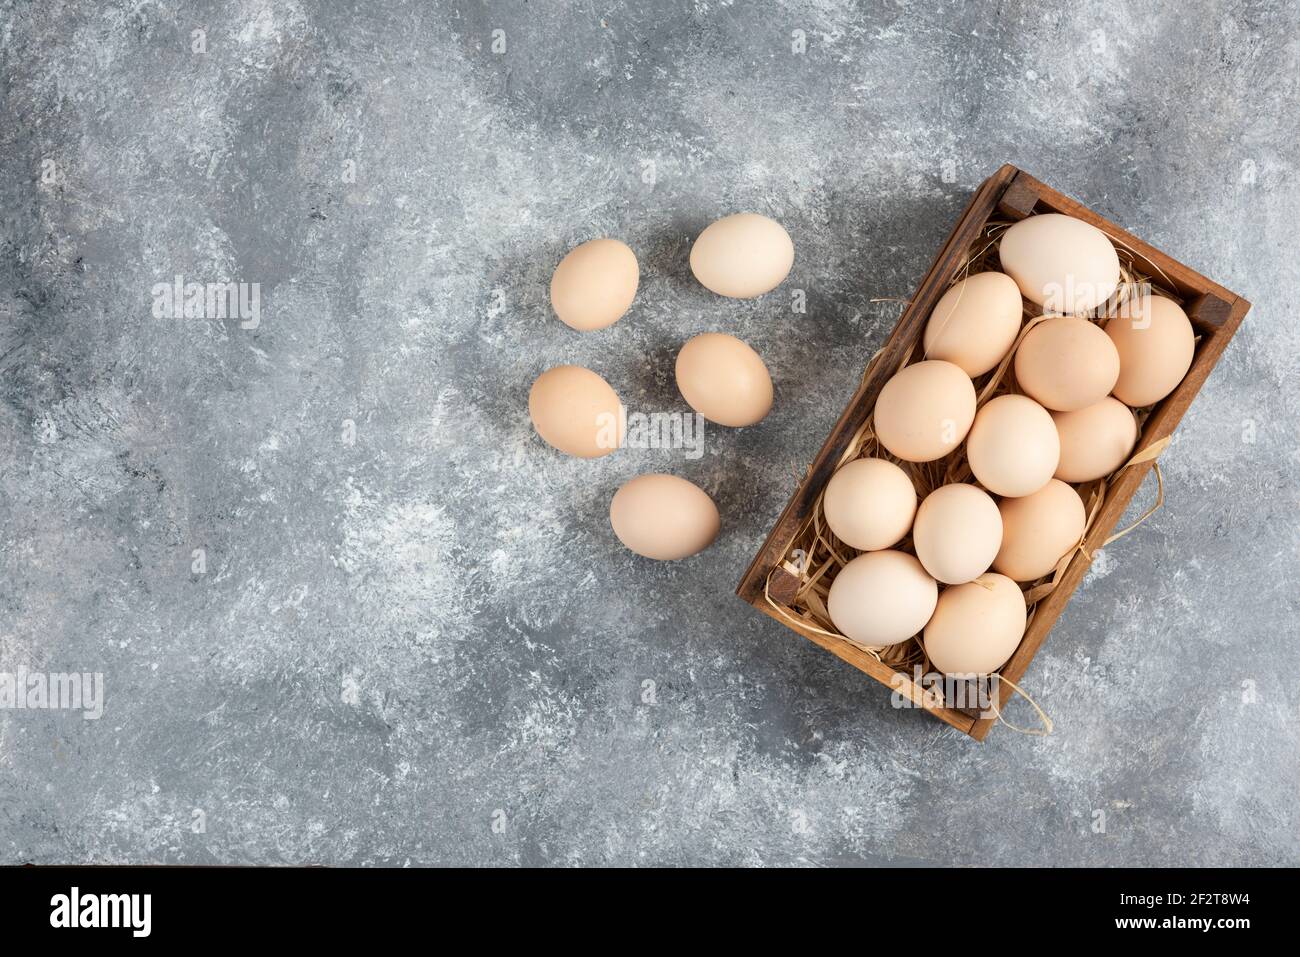 Wooden box of organic raw eggs on marble surface Stock Photo